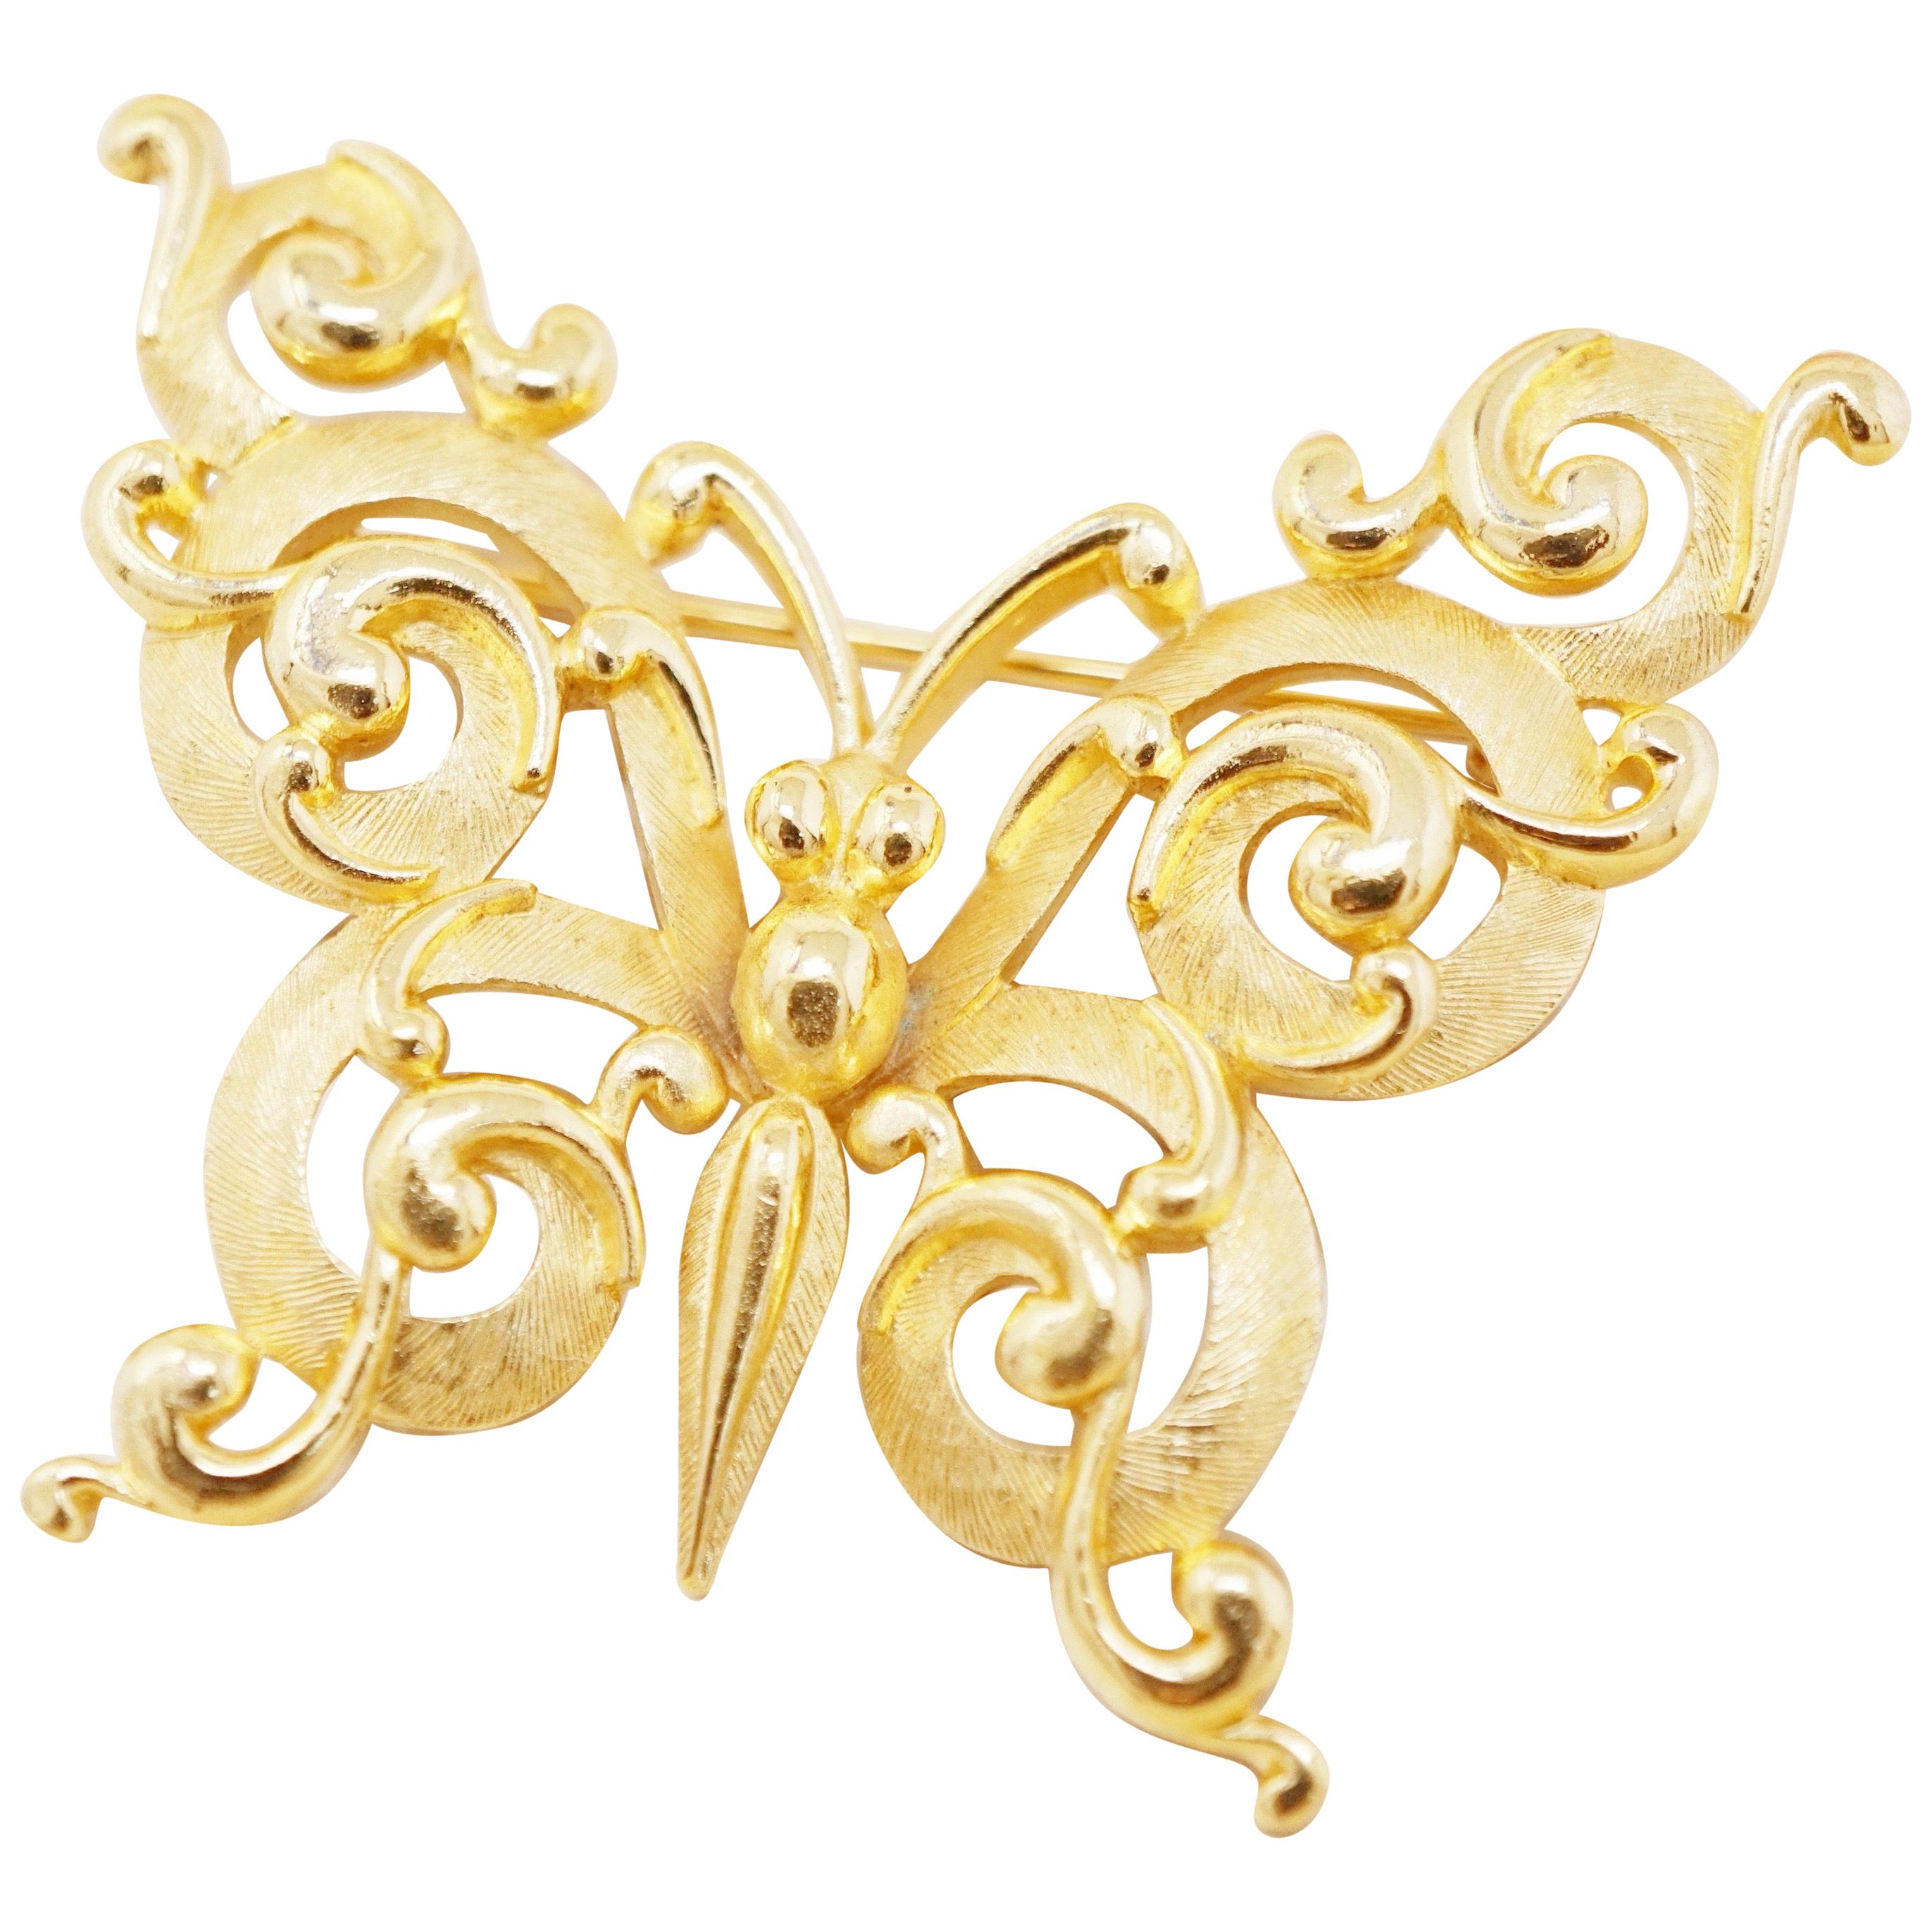 Vintage Gilt Ornate Butterfly Figural Brooch by Crown Trifari, 1960s